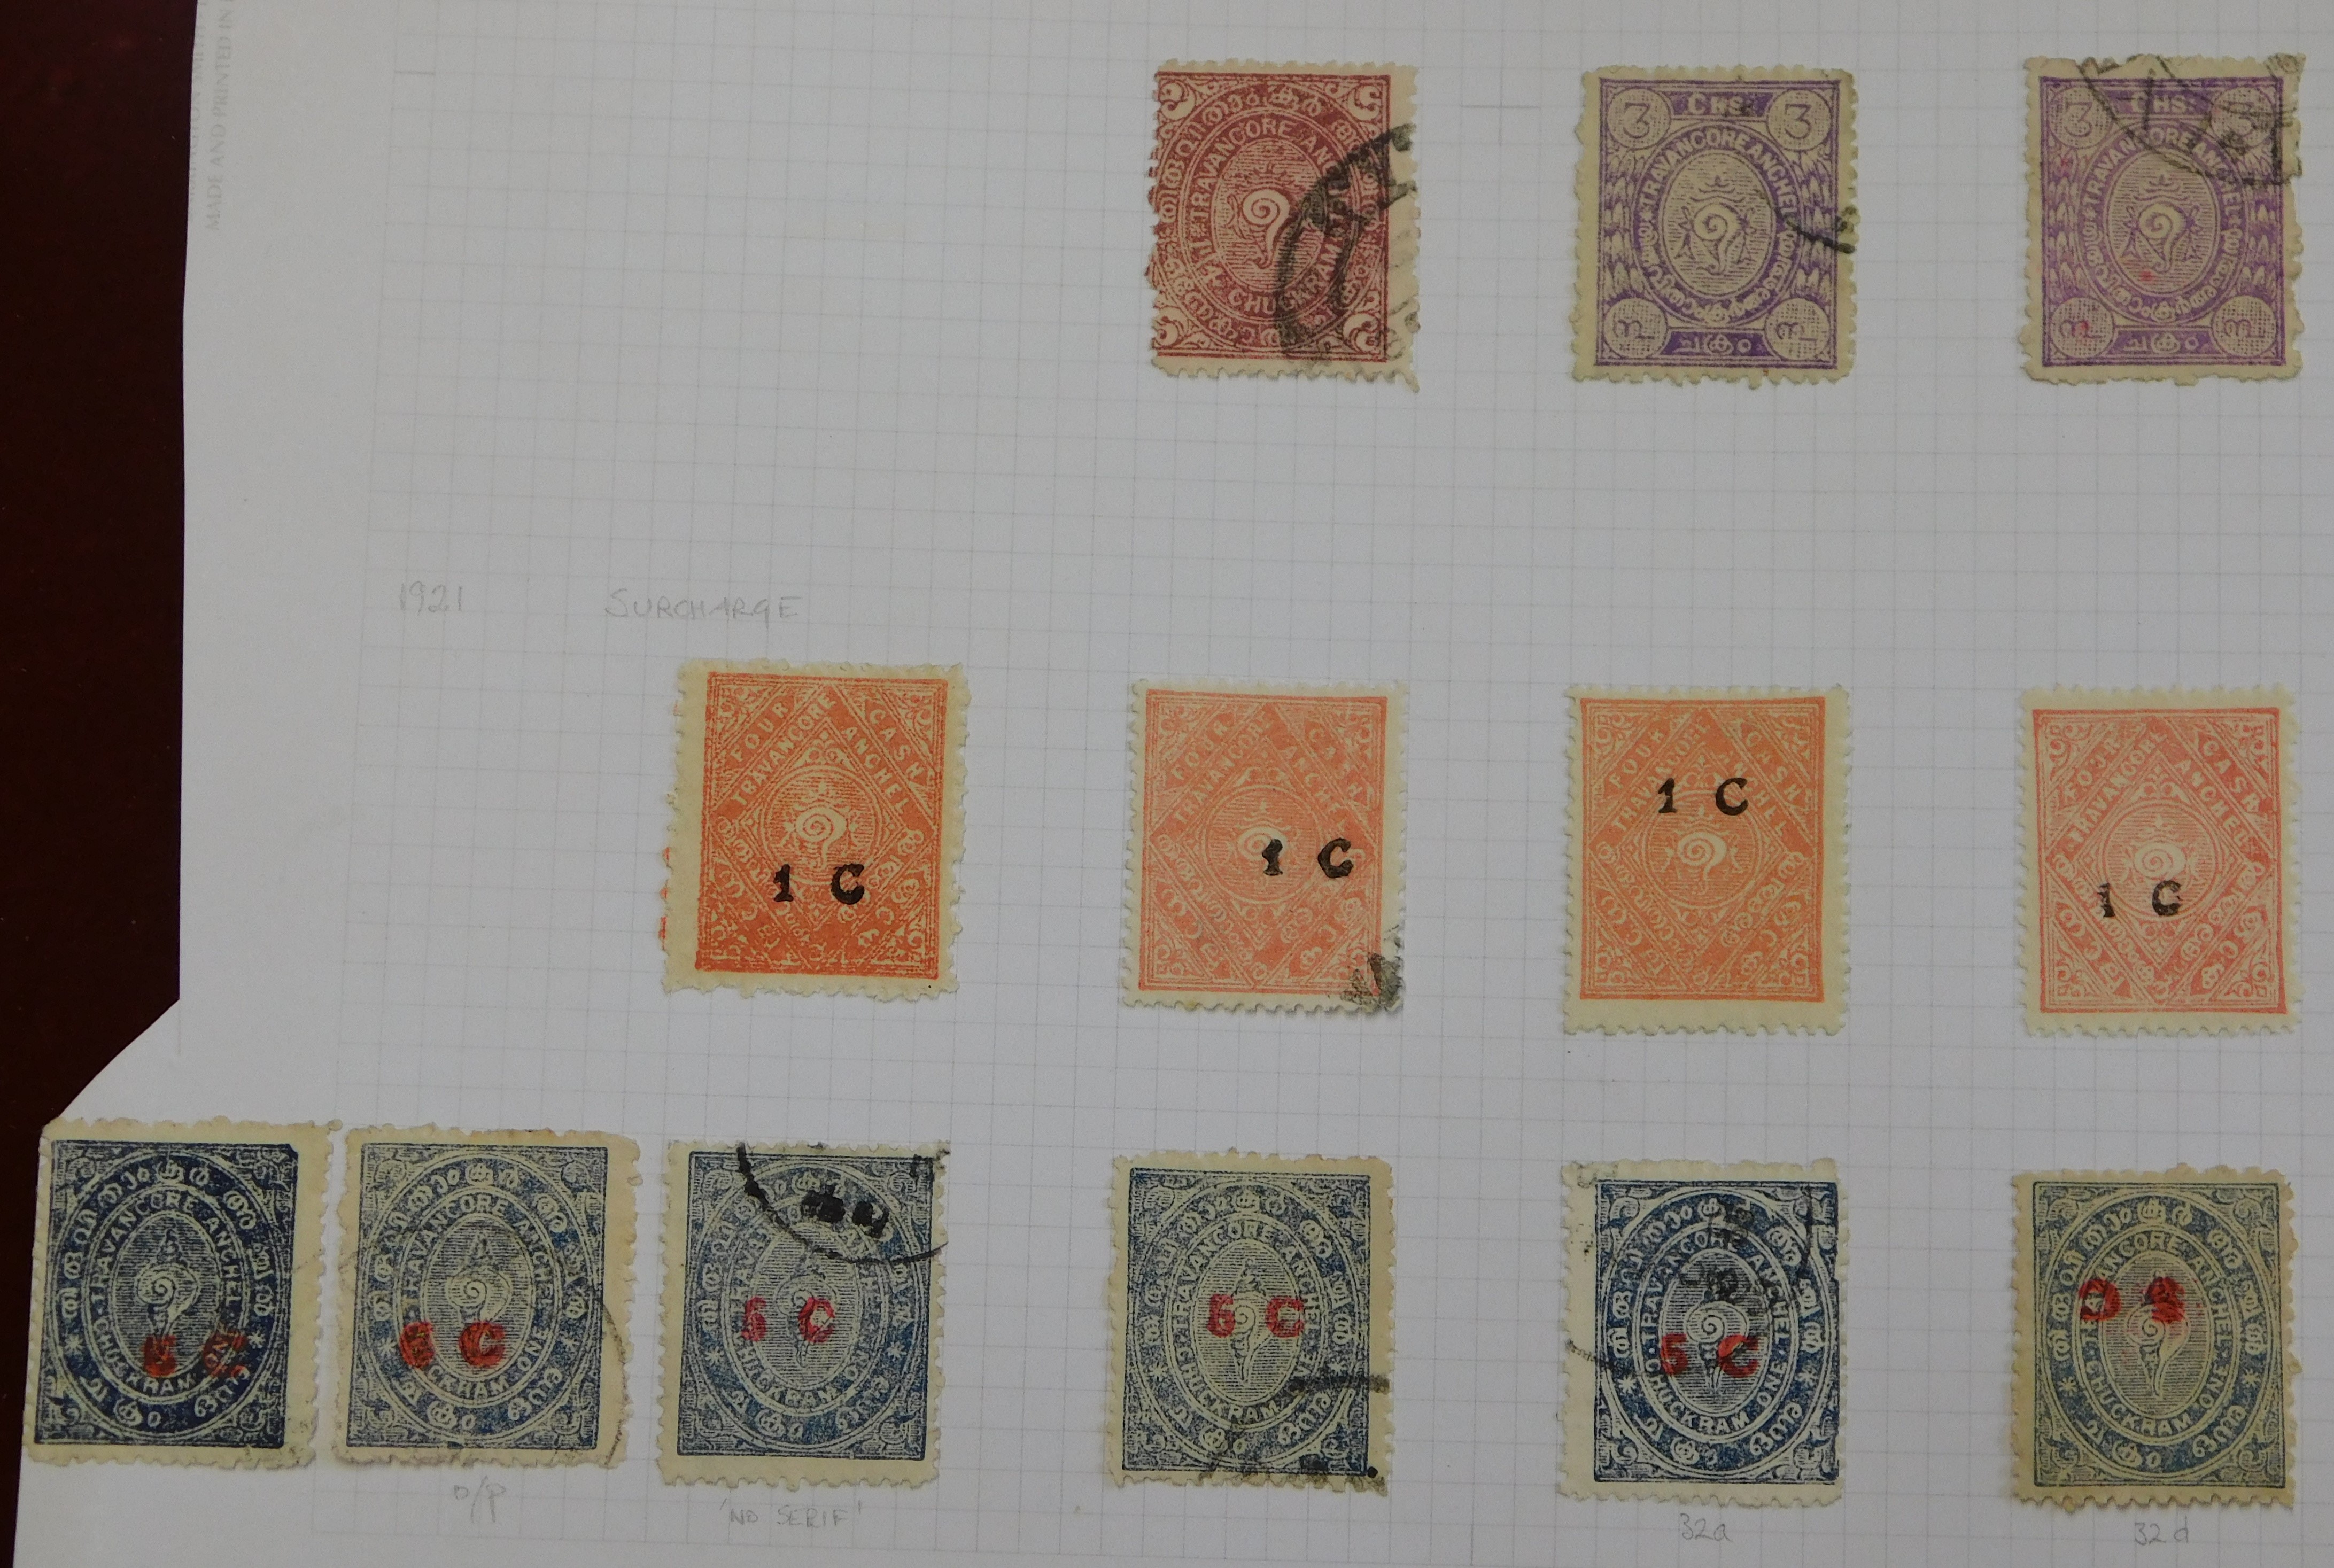 India (Travancore) 1914-1922 wmk sideways SG 23-30 Fine used with varieties (17) and 1921 Surcharges - Image 3 of 5